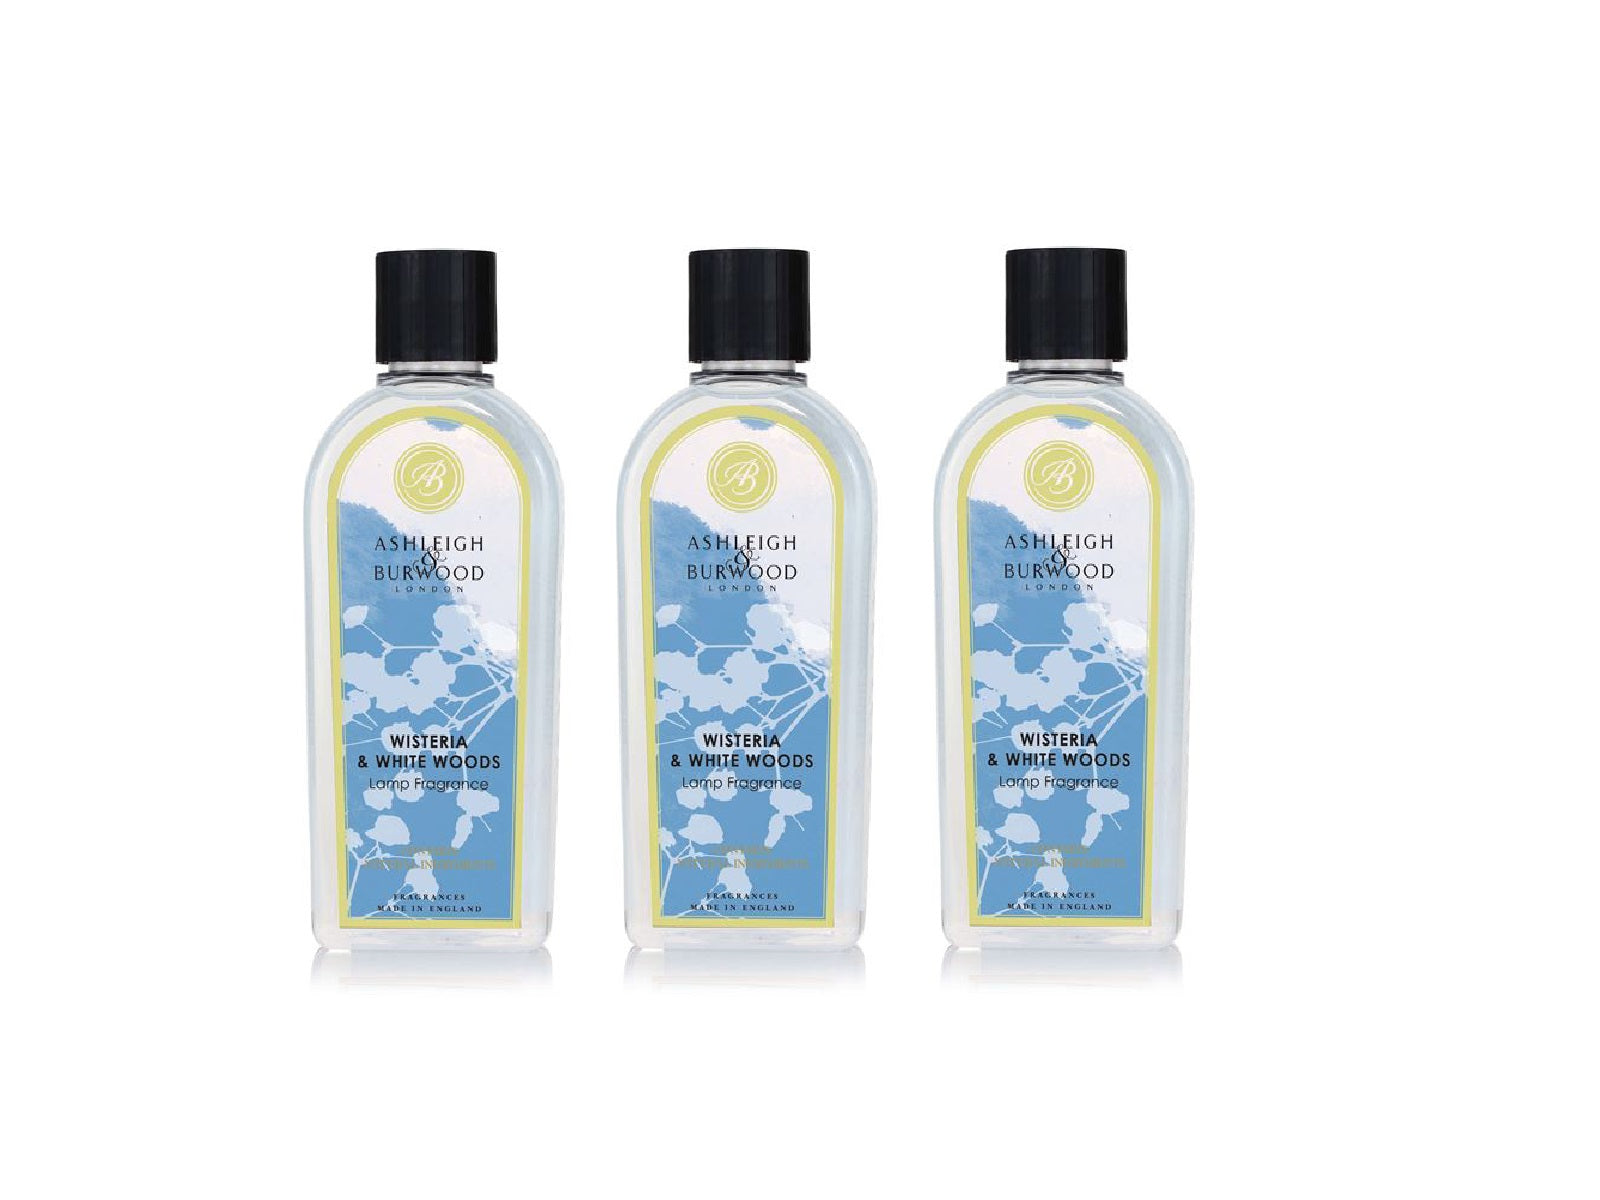 Three bottles of wisteria and white woods fragrance with floral blue labels and black caps